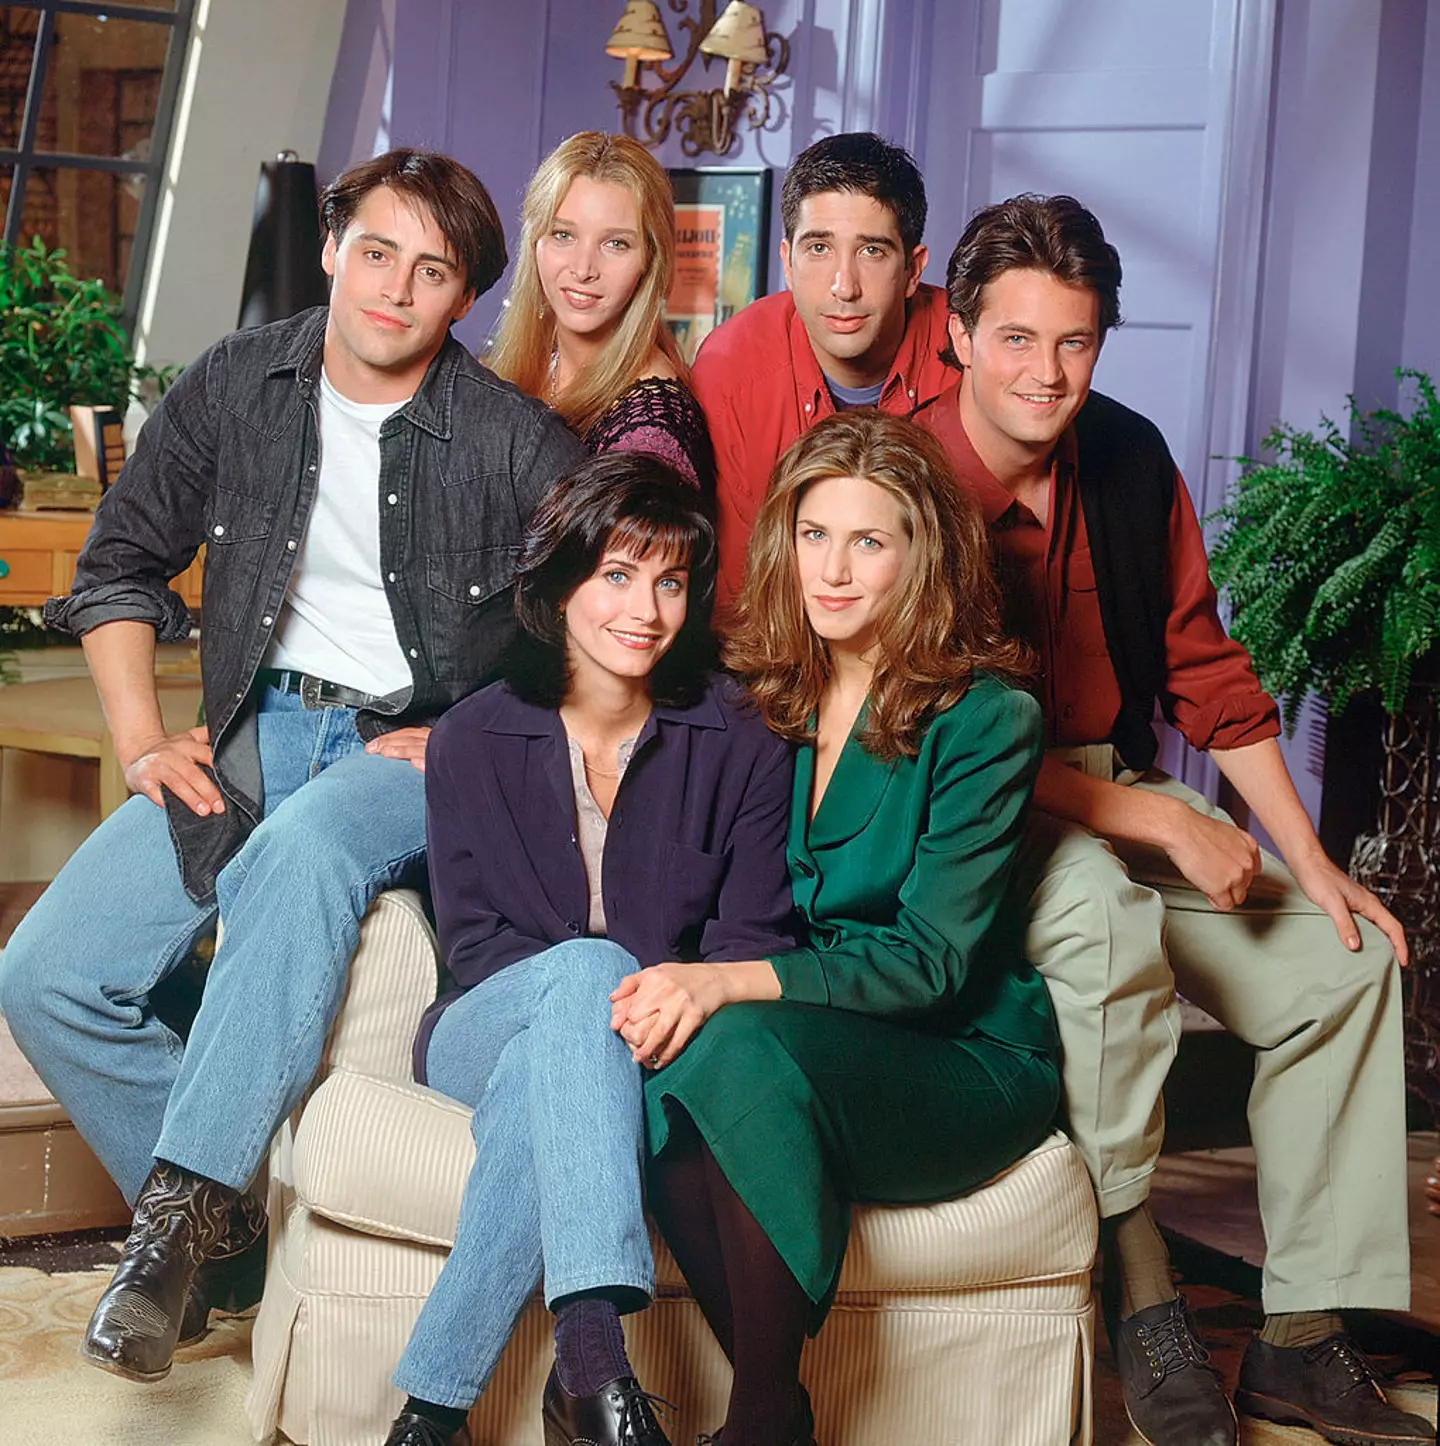 People have been discovering plot holes on Friends (Reisig & Taylor/NBCU Photo Bank/NBCUniversal via Getty Images)